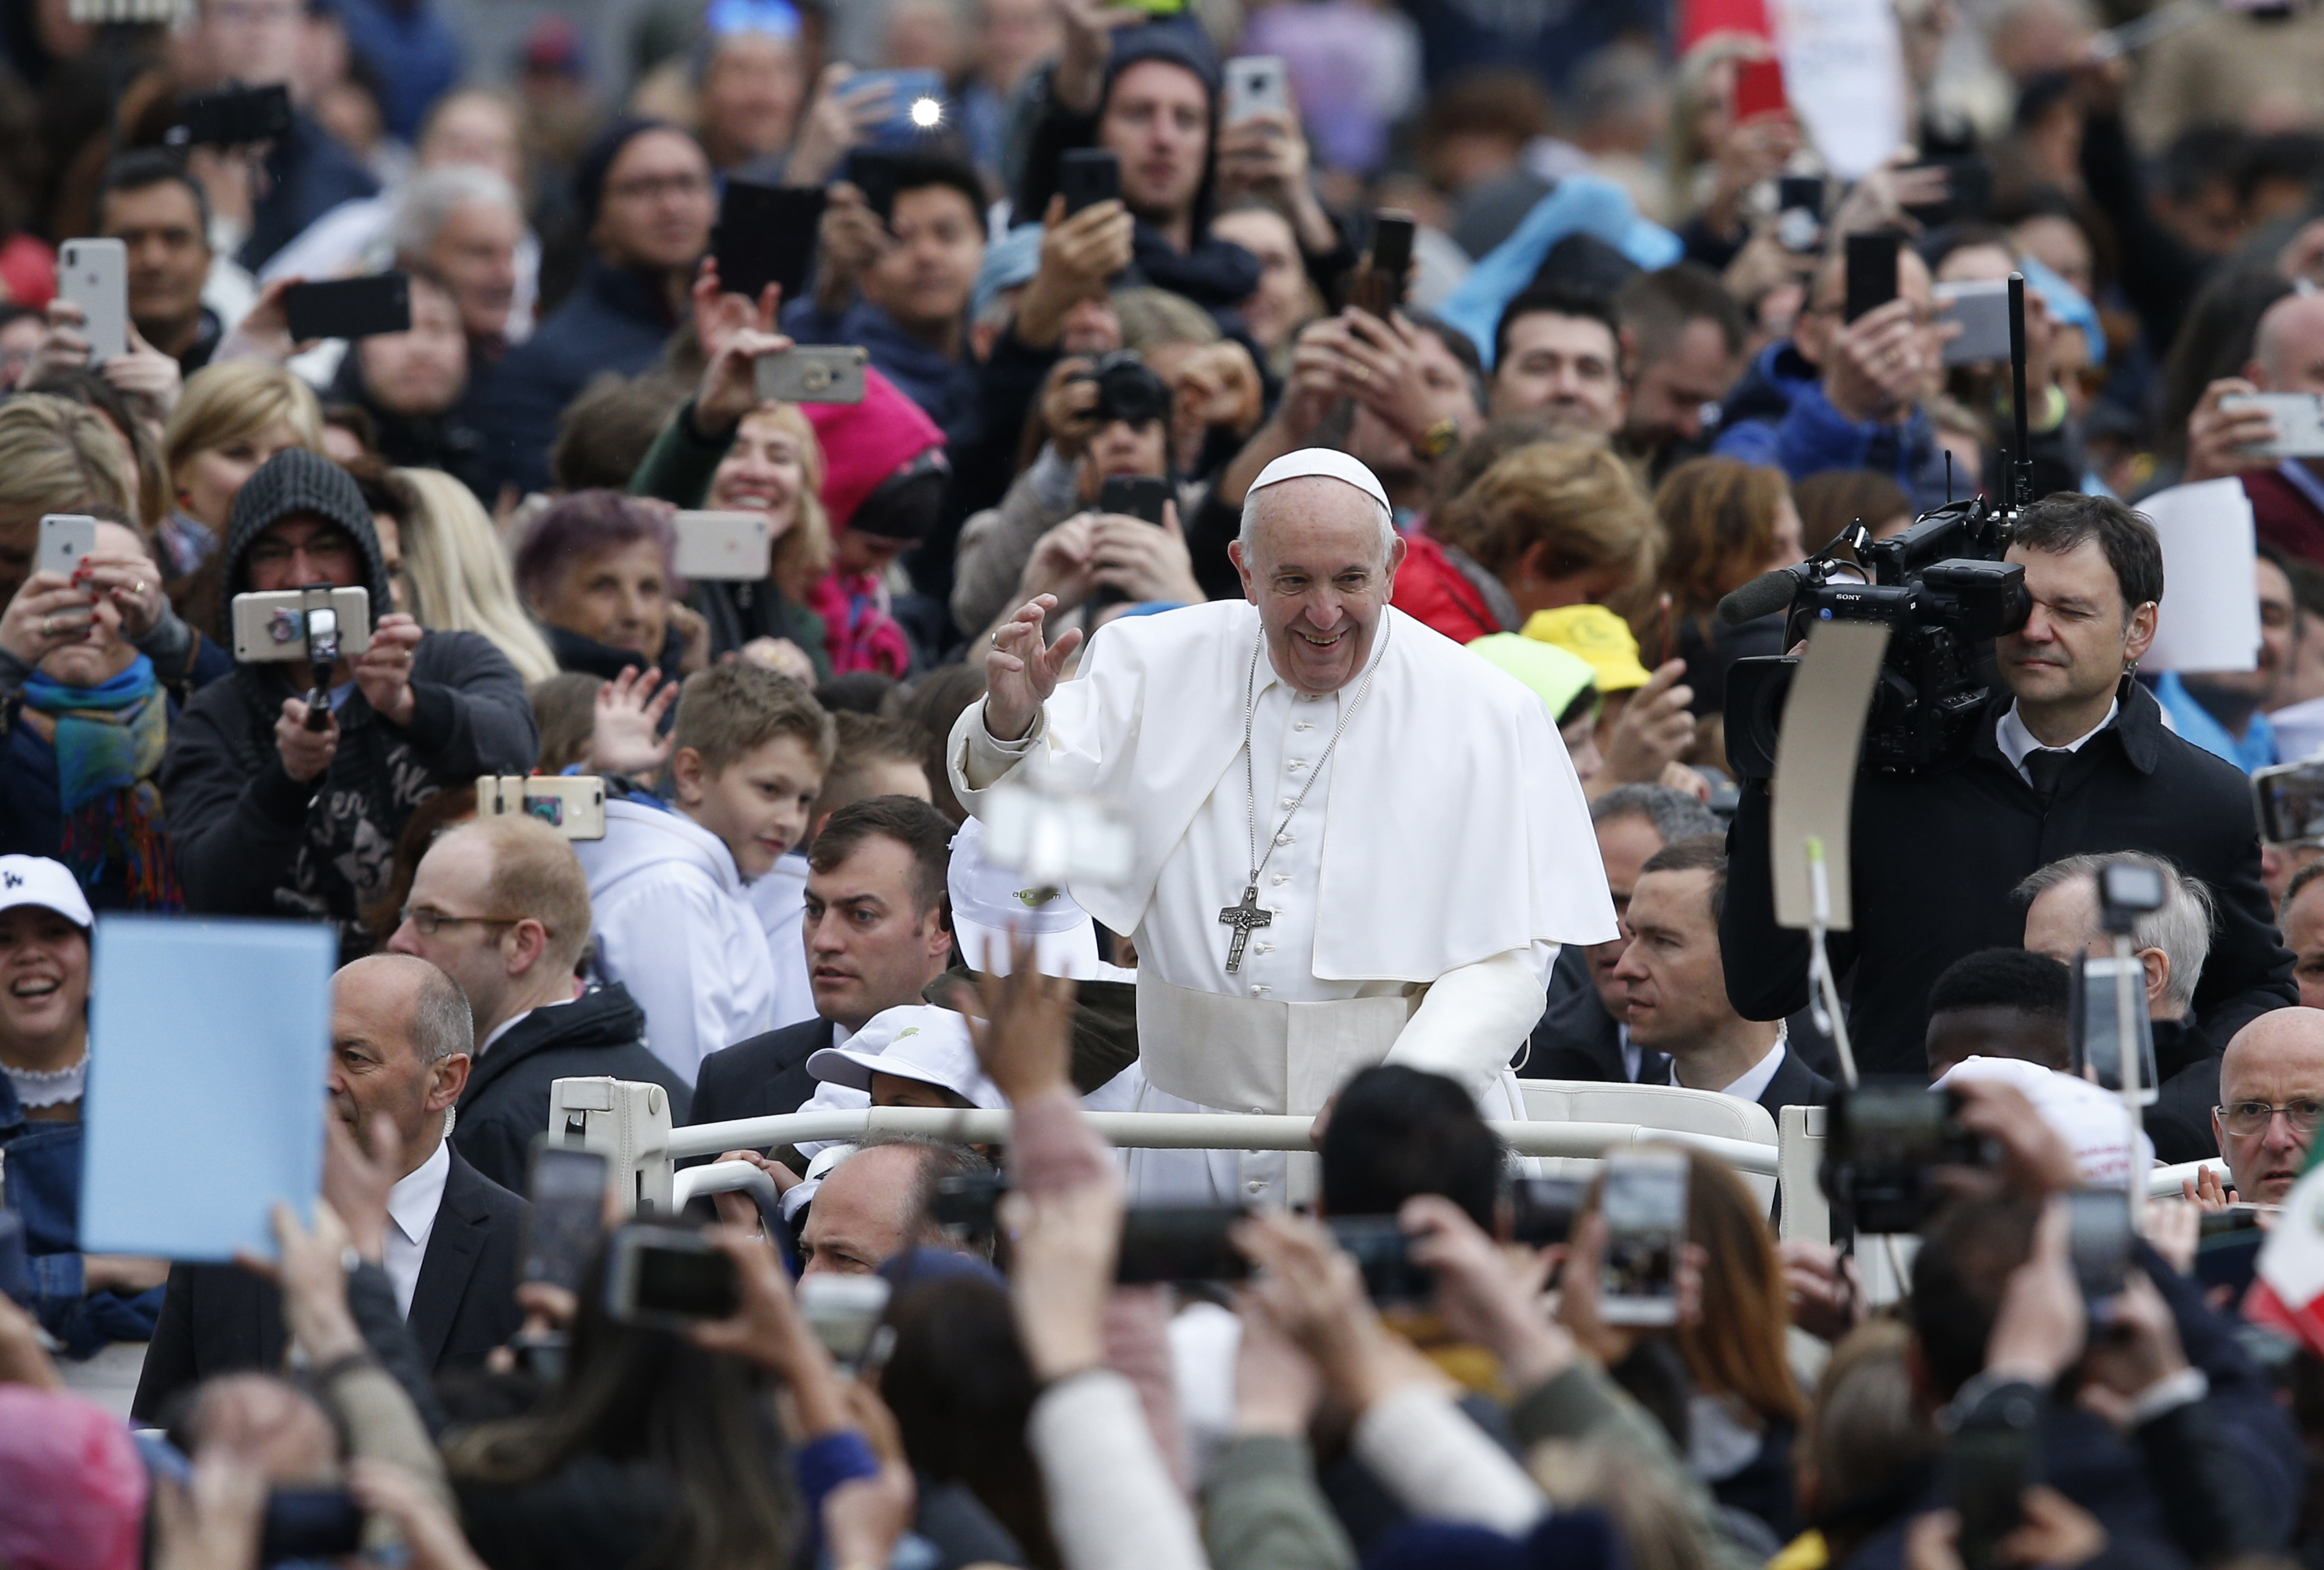 Jesus is always ready to help free people from evil, pope says